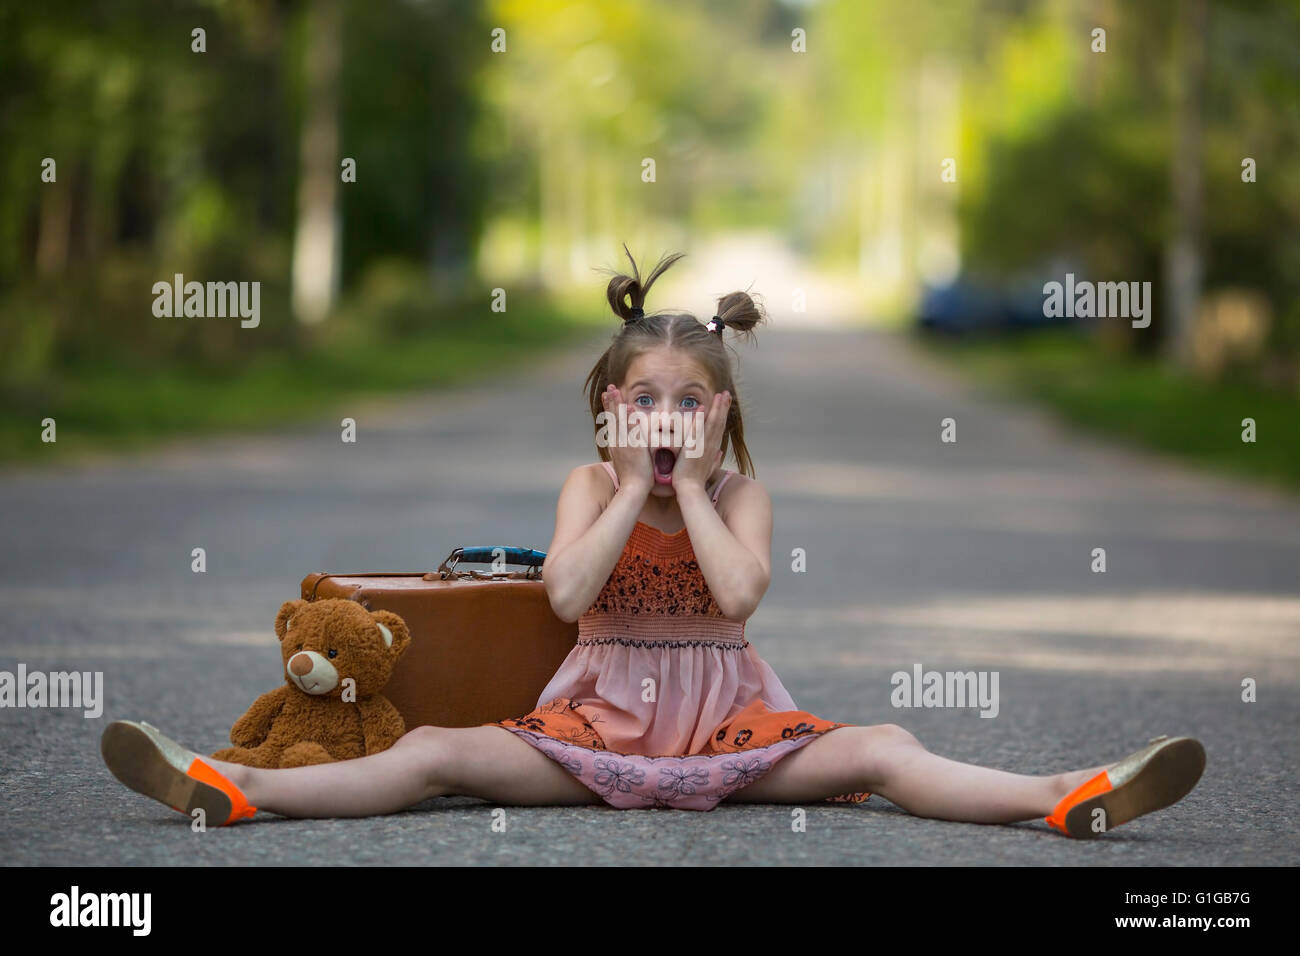 Funny little girl with a suitcase and teddy bear sitting on the road. Stock Photo